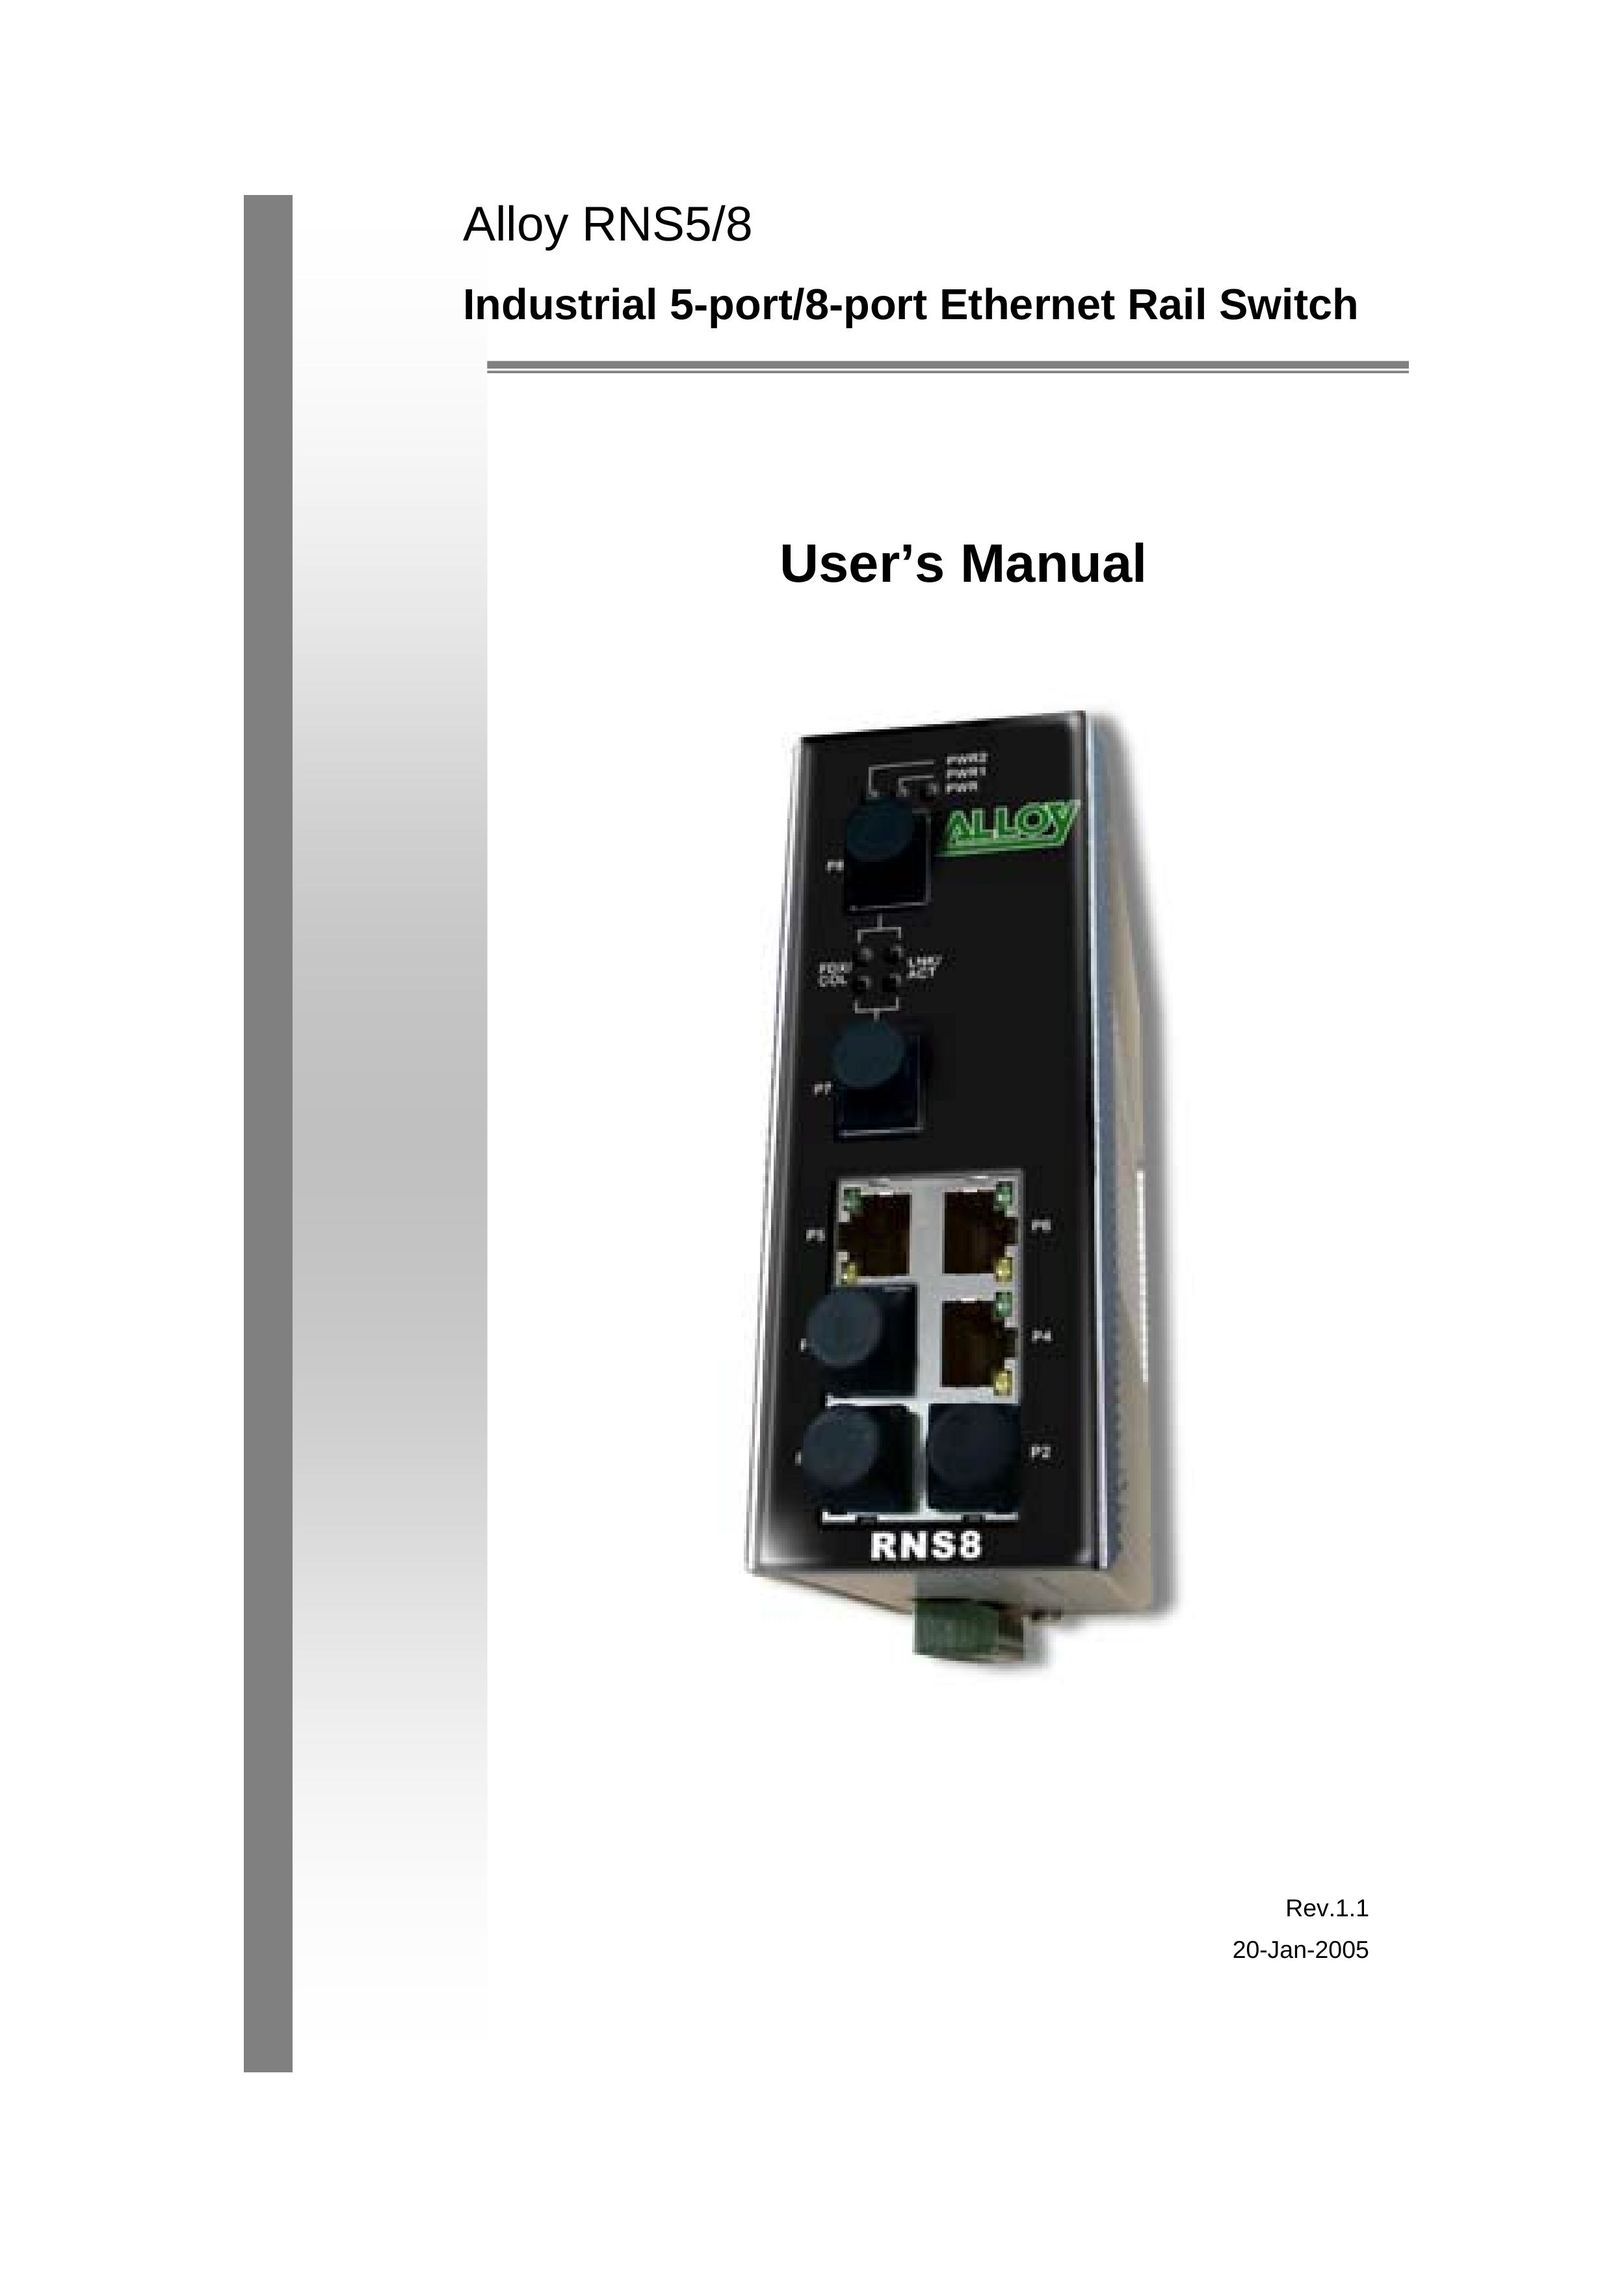 Alloy Computer Products RNS8 Switch User Manual